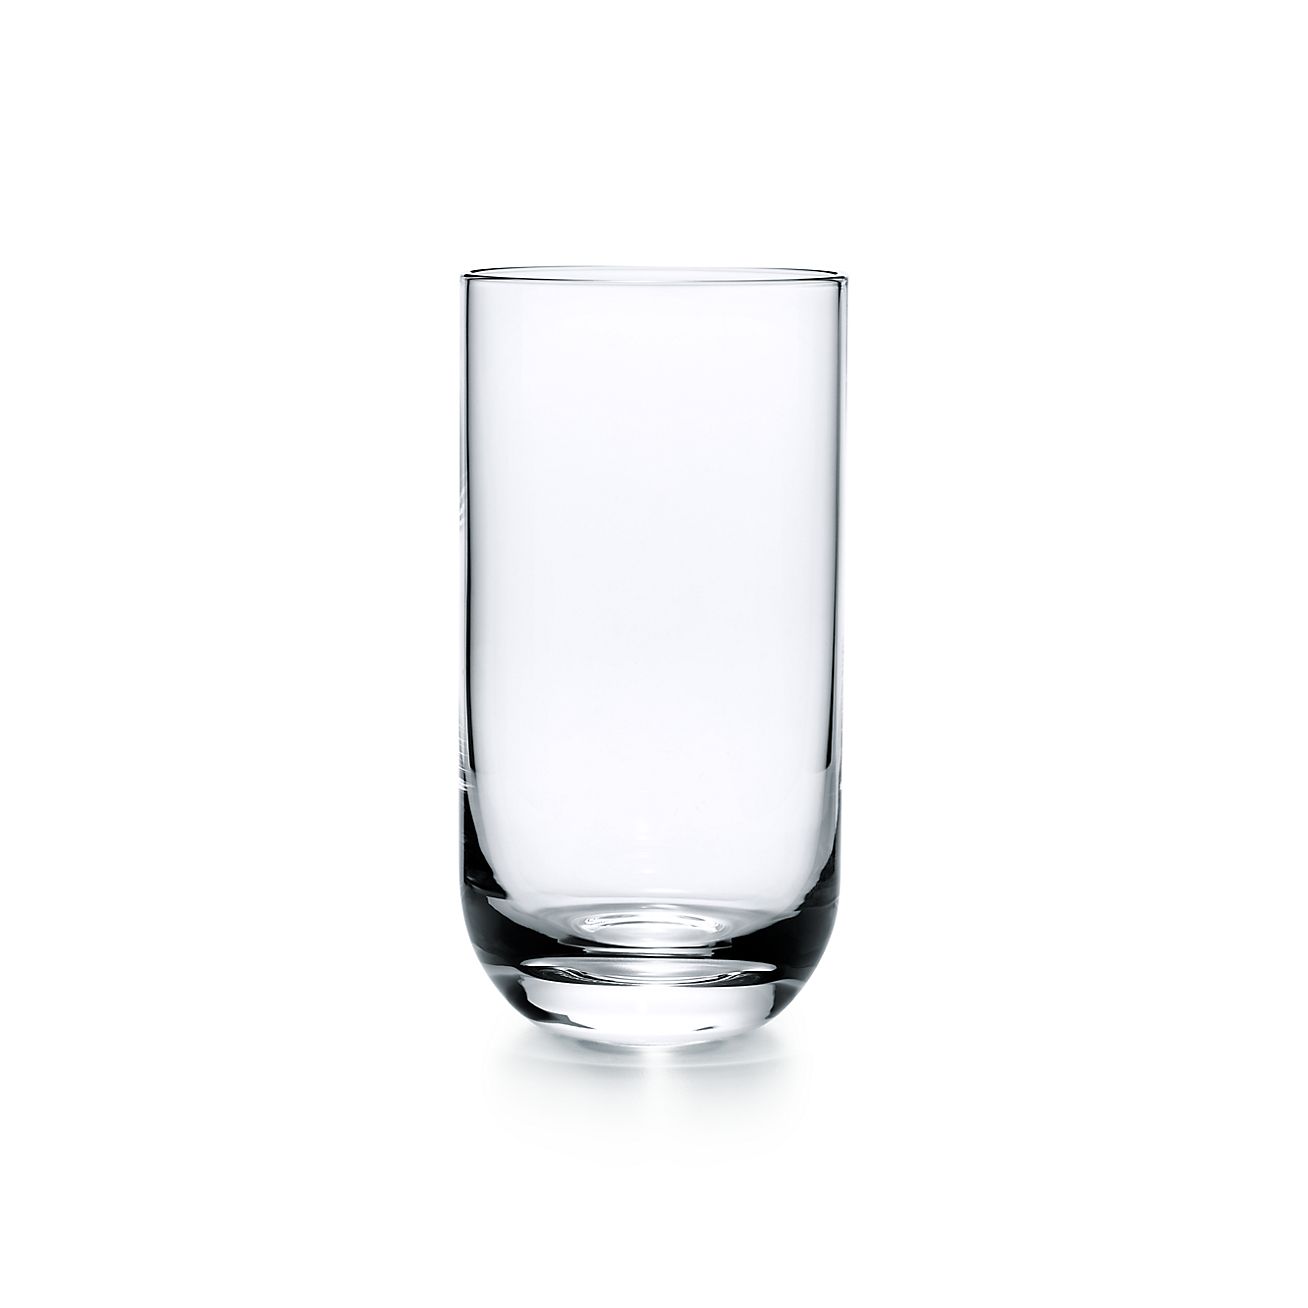 Refresher set individual glass in mouth 